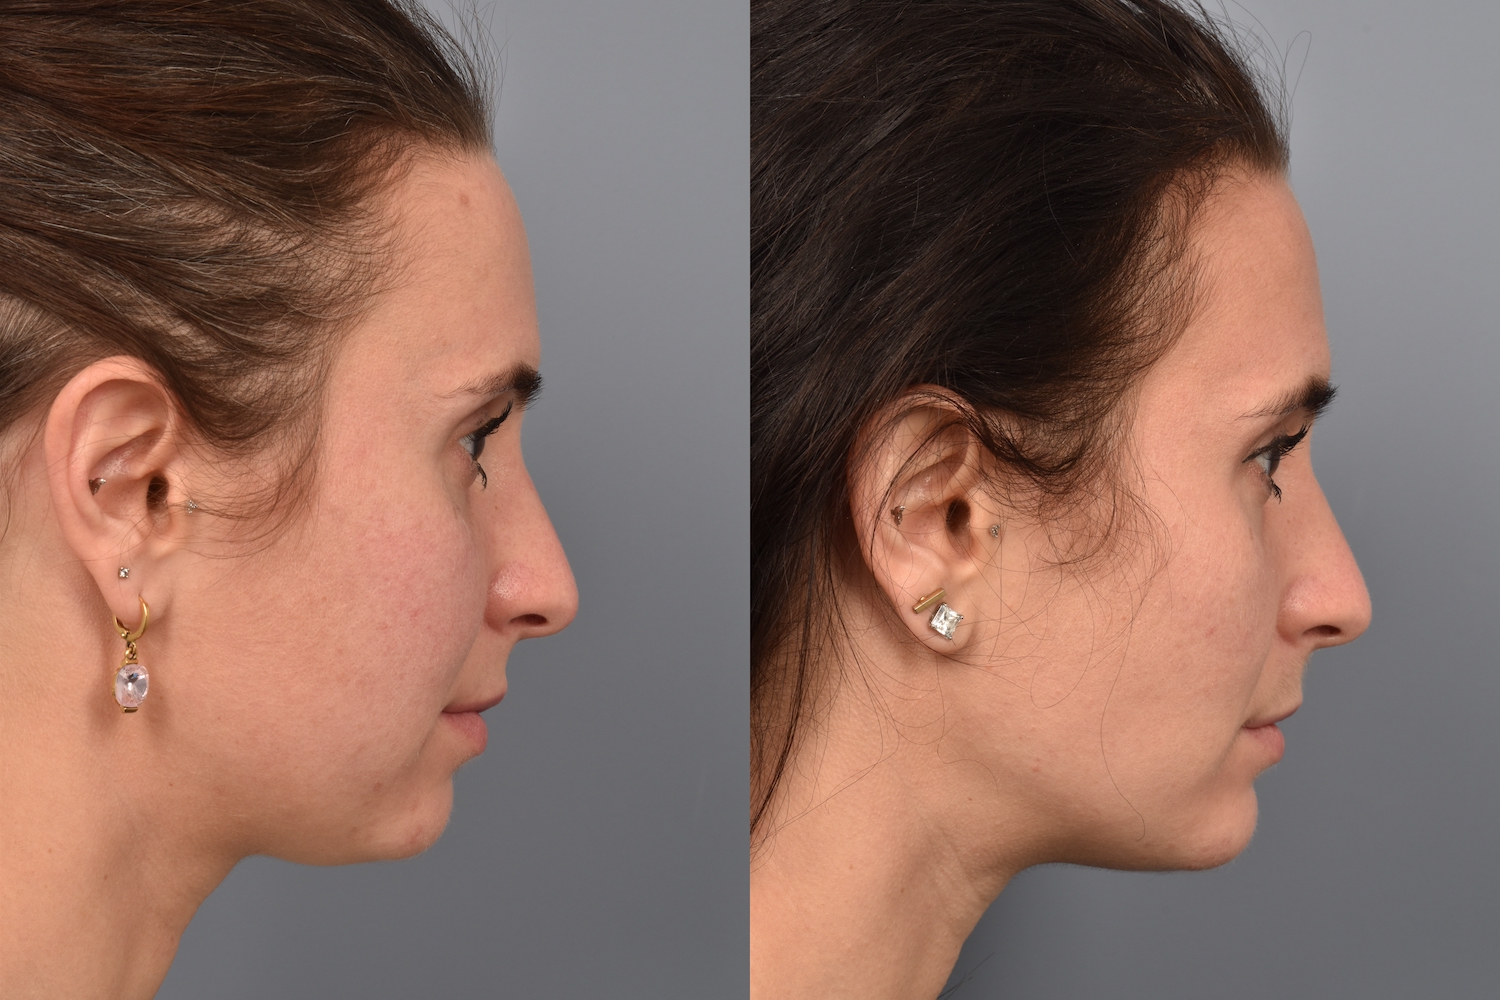 patient before and after buccal fat removal